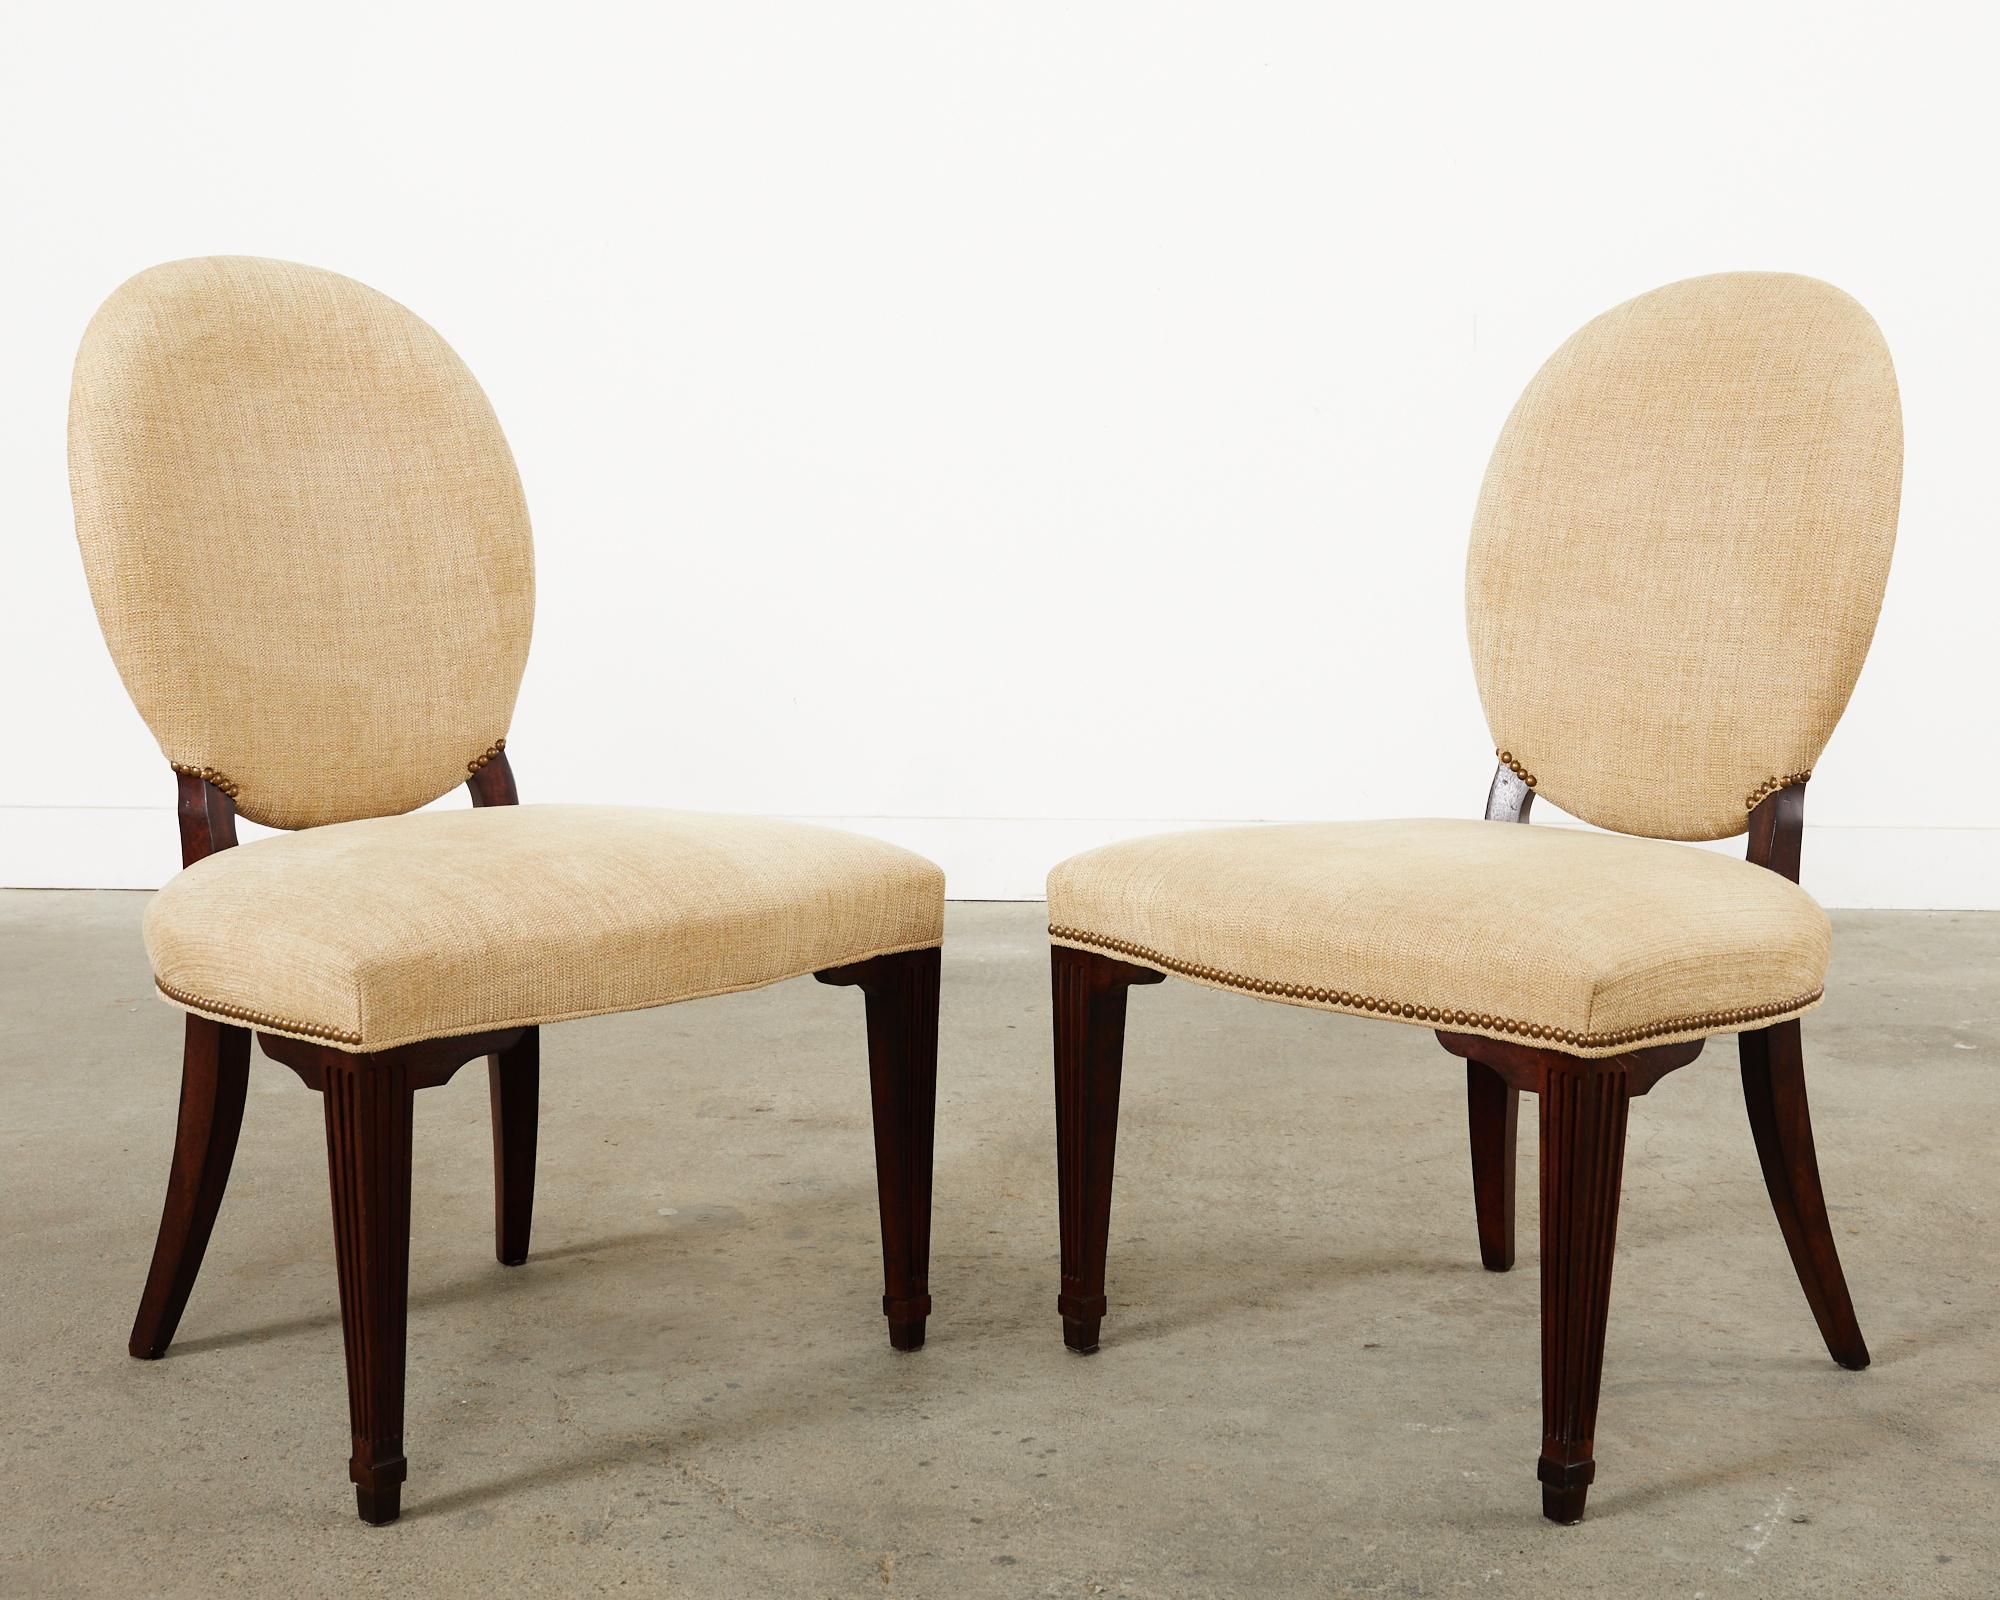 20th Century Barbara Barry Style Mahogany Dining Chairs by Hickory Chair For Sale